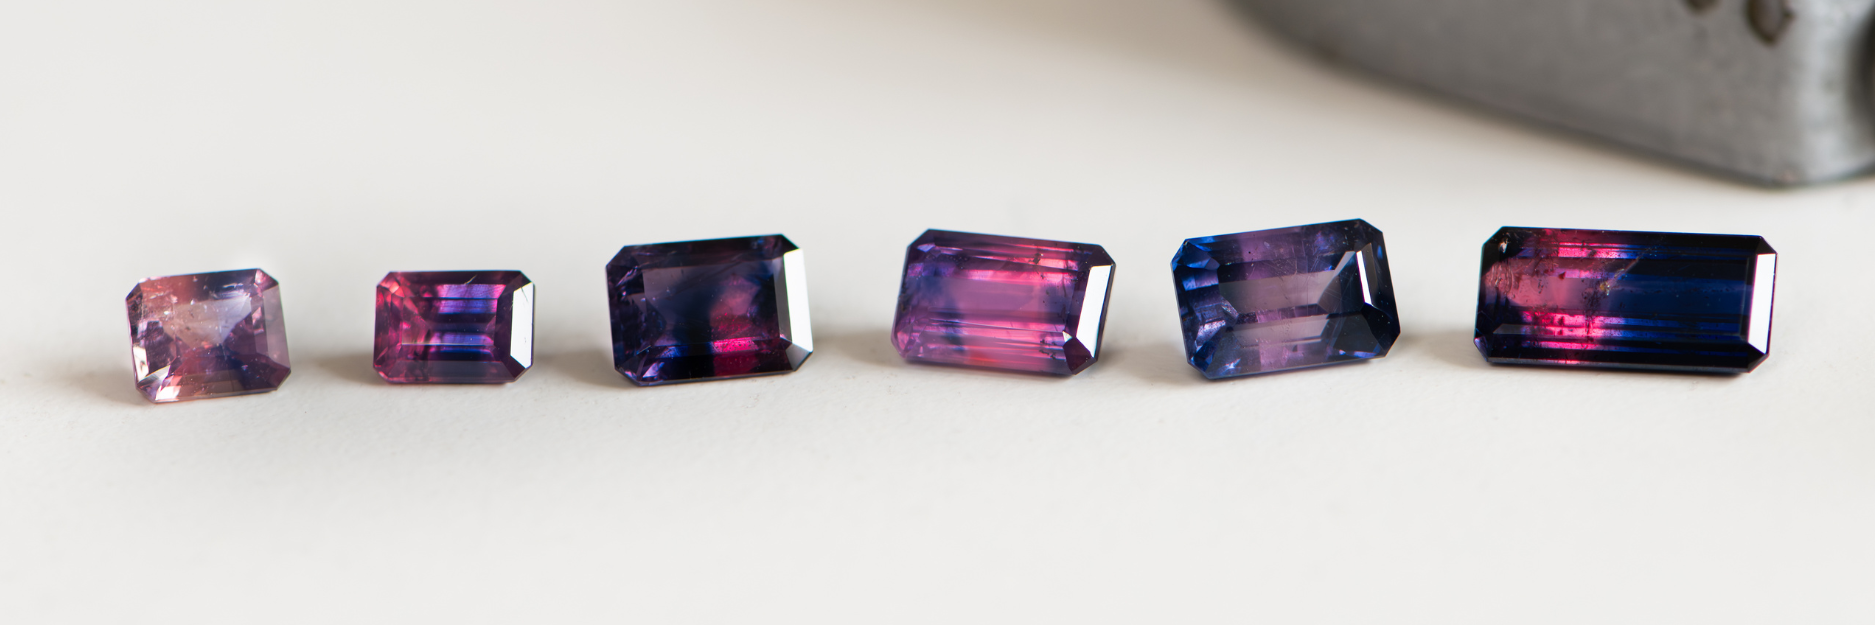 A small parcel of vibrant pink and deep blue Winza sapphires